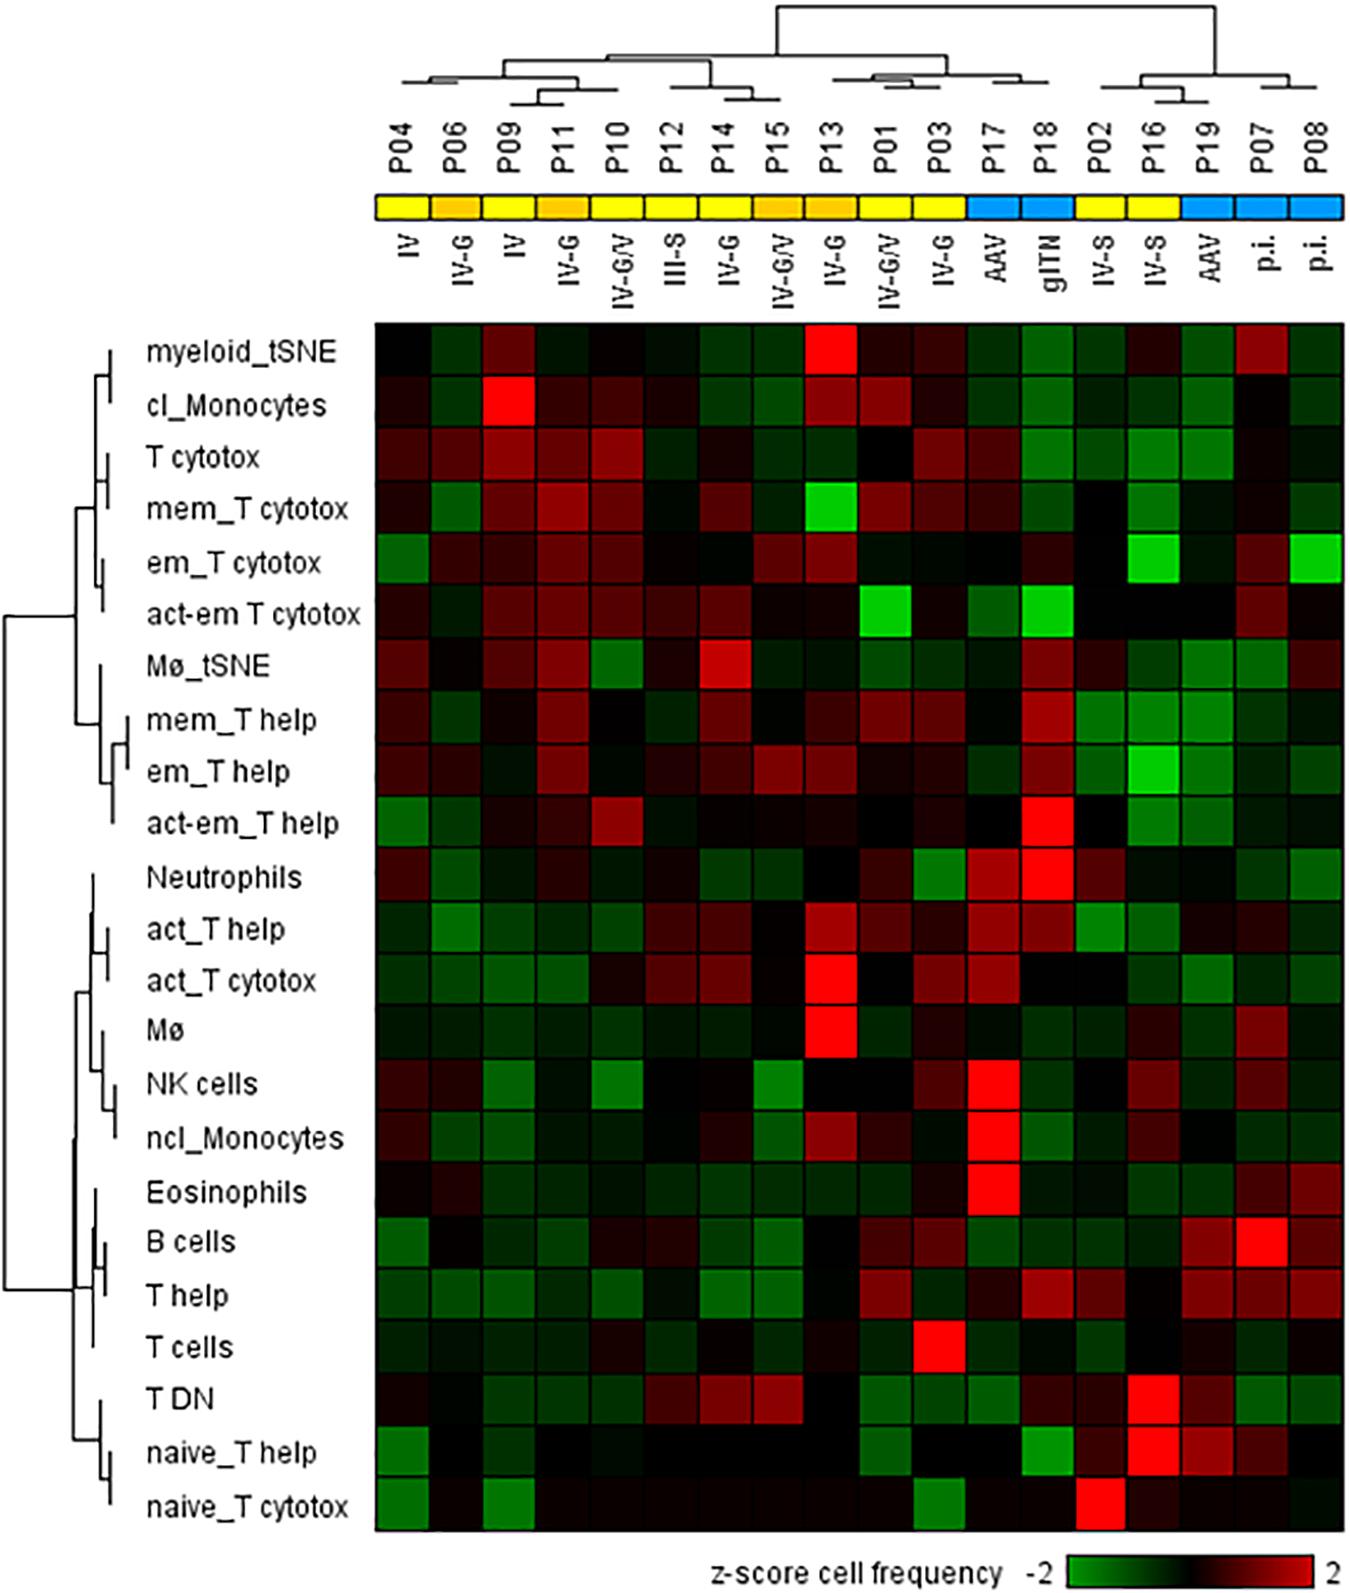 Frontiers  Deep Phenotyping of Urinary Leukocytes by Mass Cytometry  Reveals a Leukocyte Signature for Early and Non-Invasive Prediction of  Response to Treatment in Active Lupus Nephritis